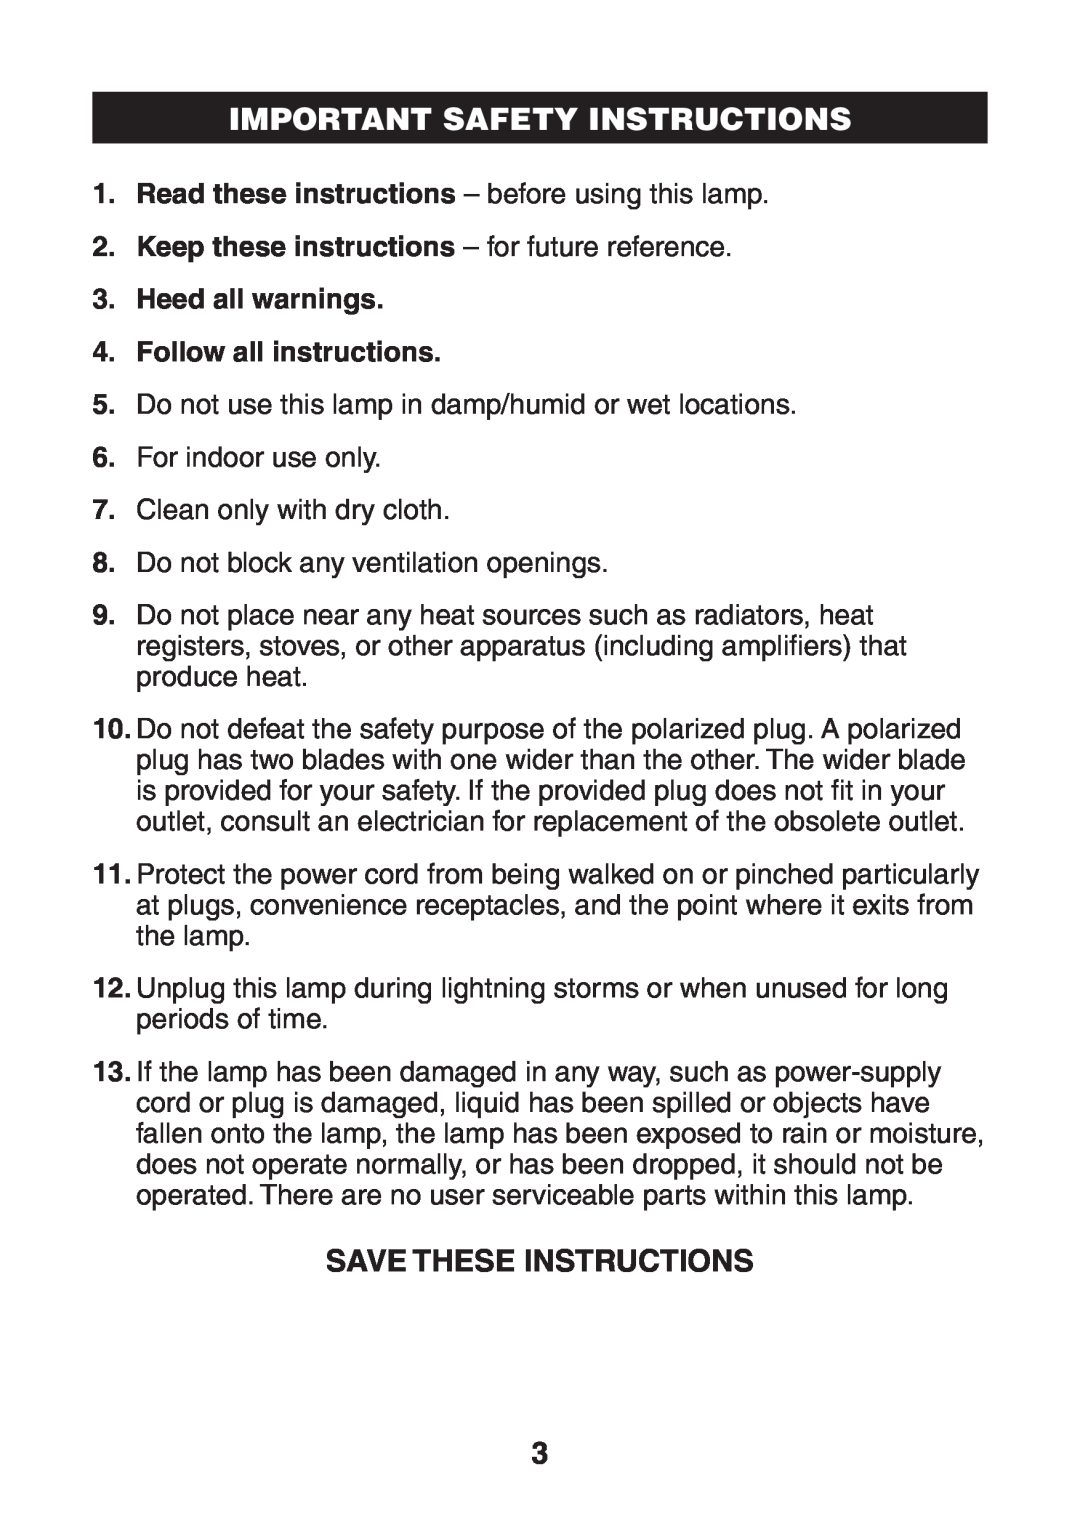 Verilux VT03 manual Save These Instructions, Important Safety Instructions, Keep these instructions - for future reference 